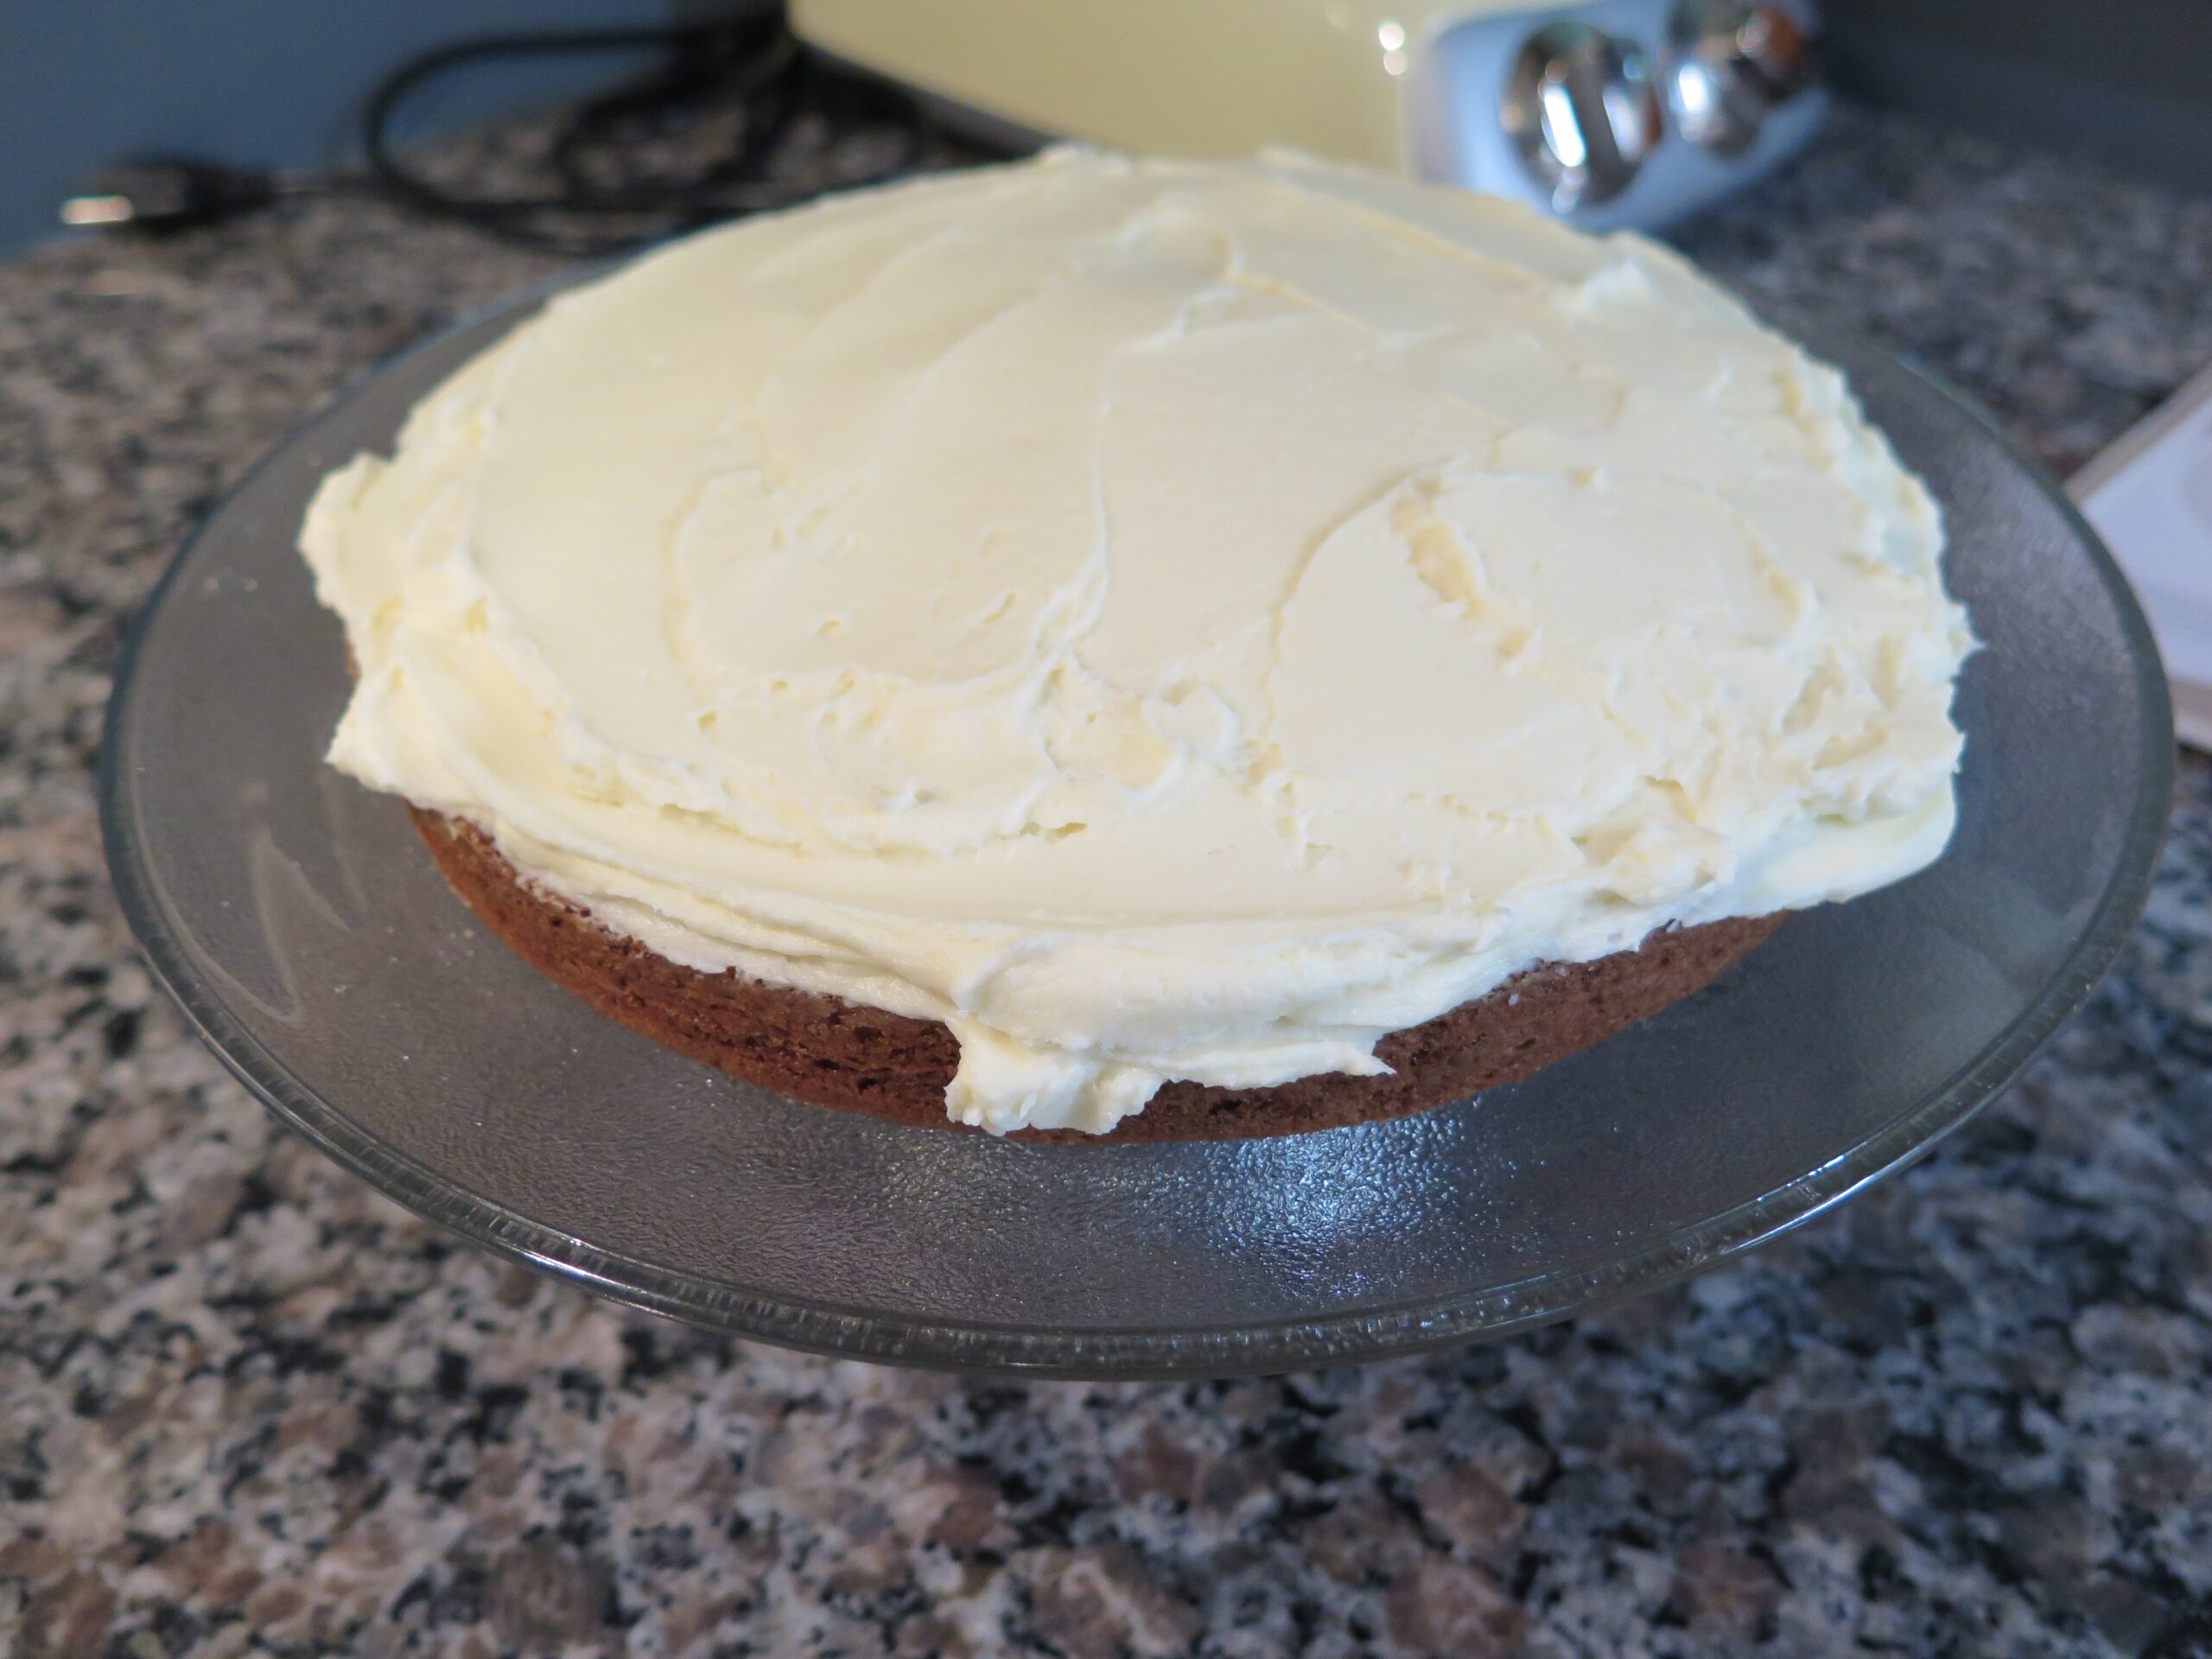 First layer of carrot cake frosted